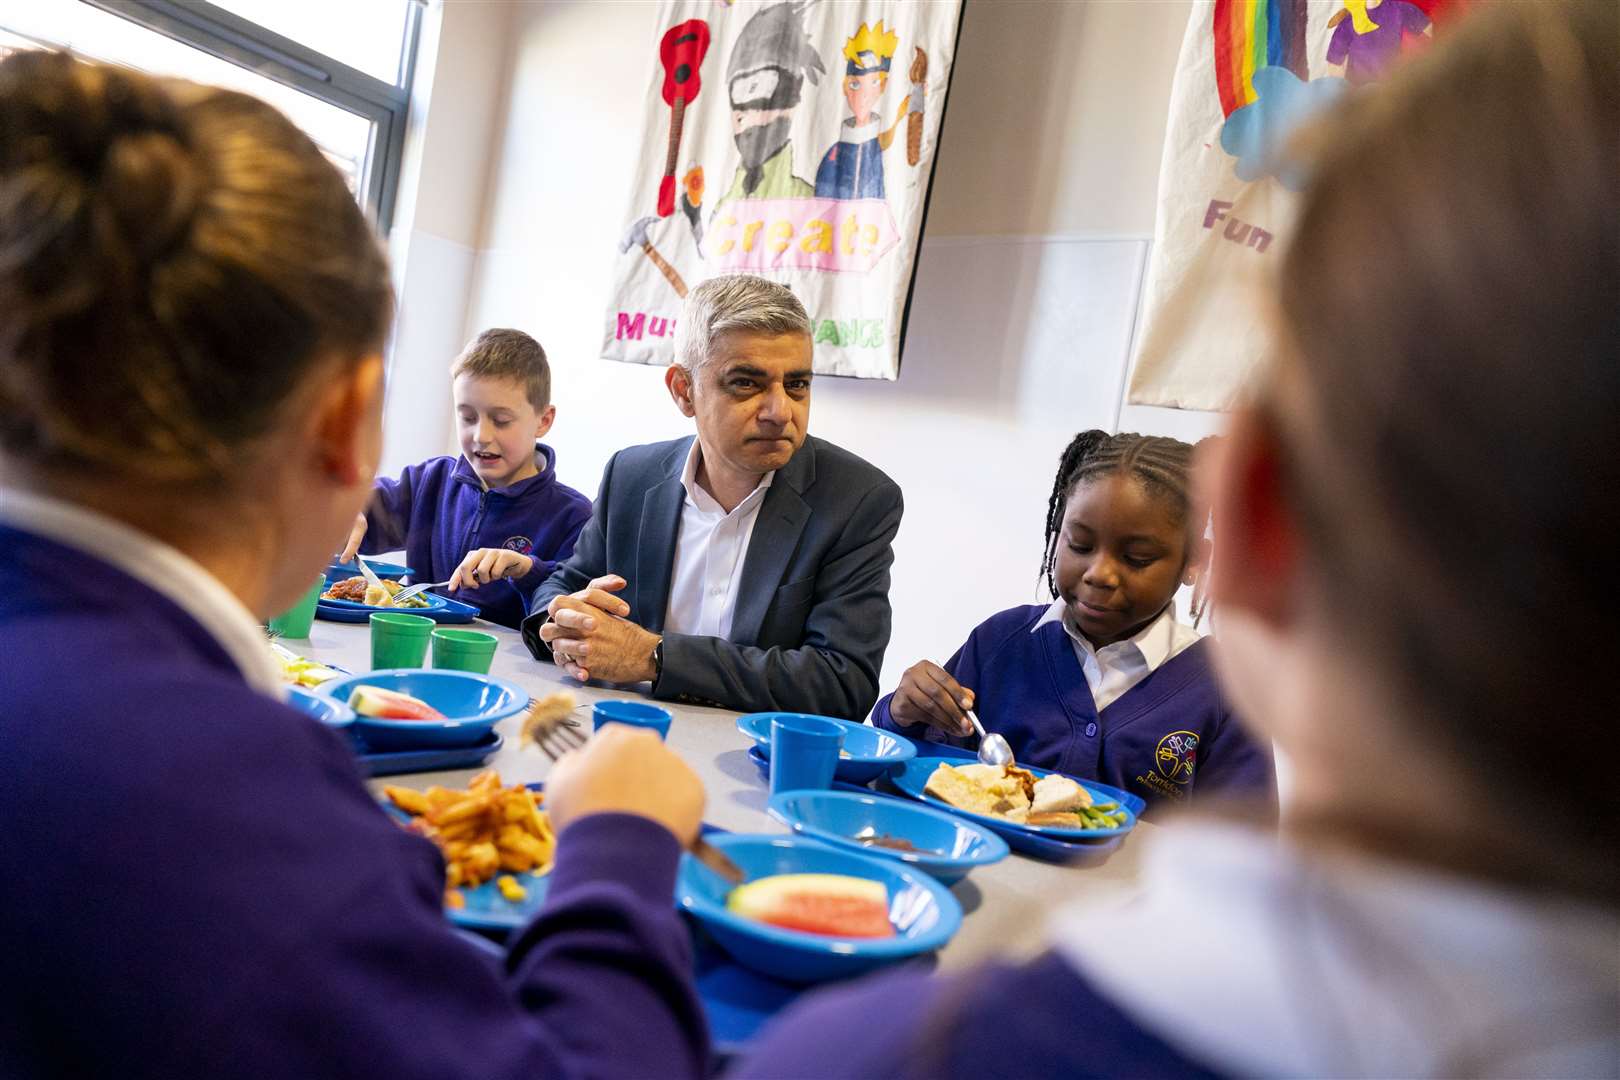 Mayor of London Sadiq Khan during a visit to Torridon Primary School in south east London, to announce the extension of free school meals in London’s primary schools (Jordan Pettitt/PA)